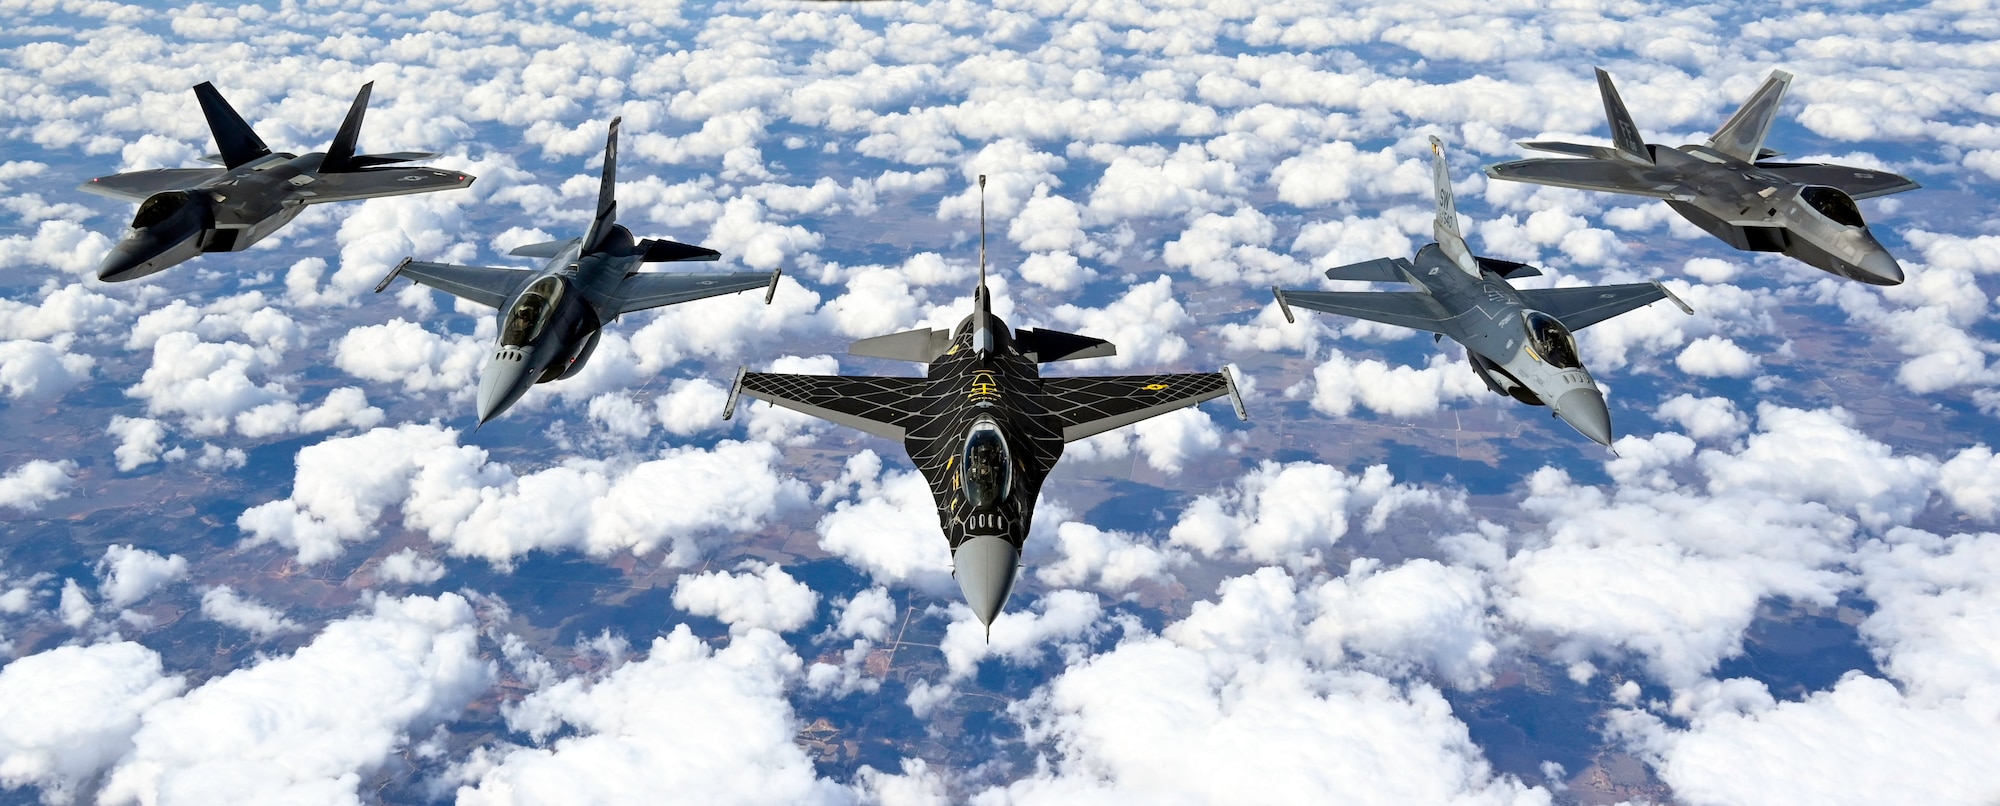 F-16 Viper and F-22 Raptor demo teams refuel with Okies > Air Force Reserve Command > News Article